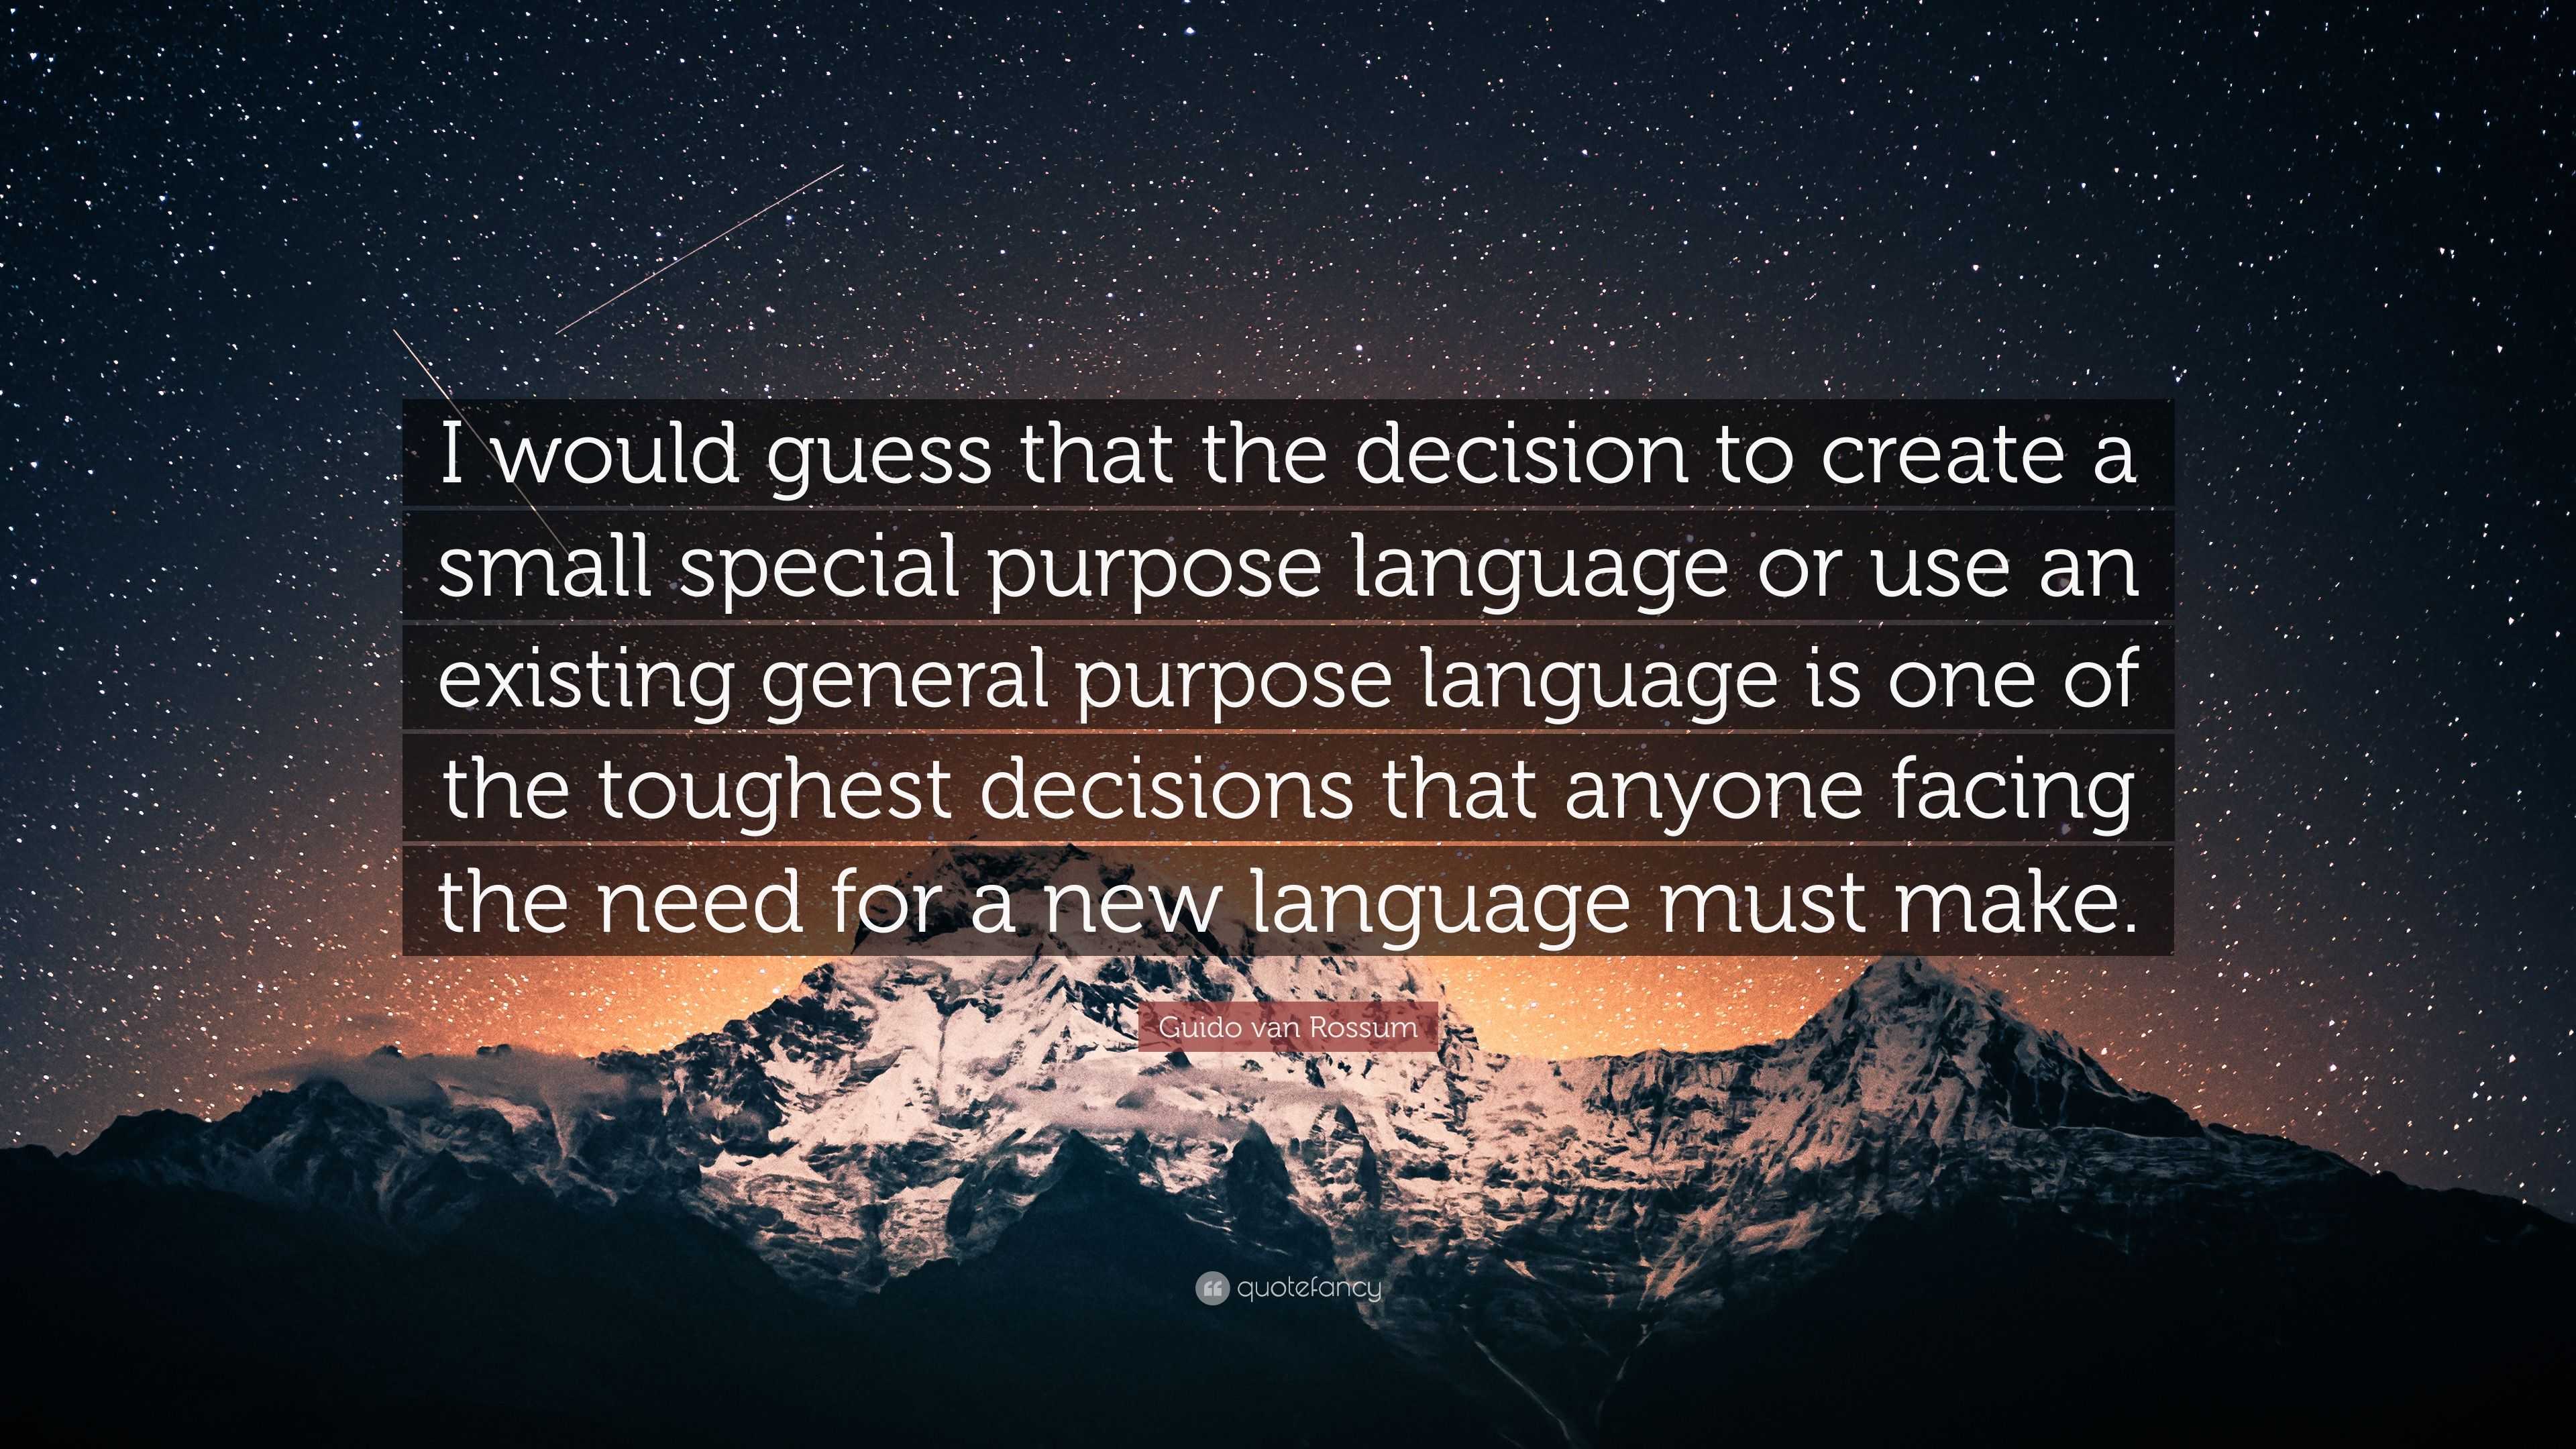 Guido van Rossum Quote: “I would guess the decision to a small special purpose language or use an existing general purpose language i...”